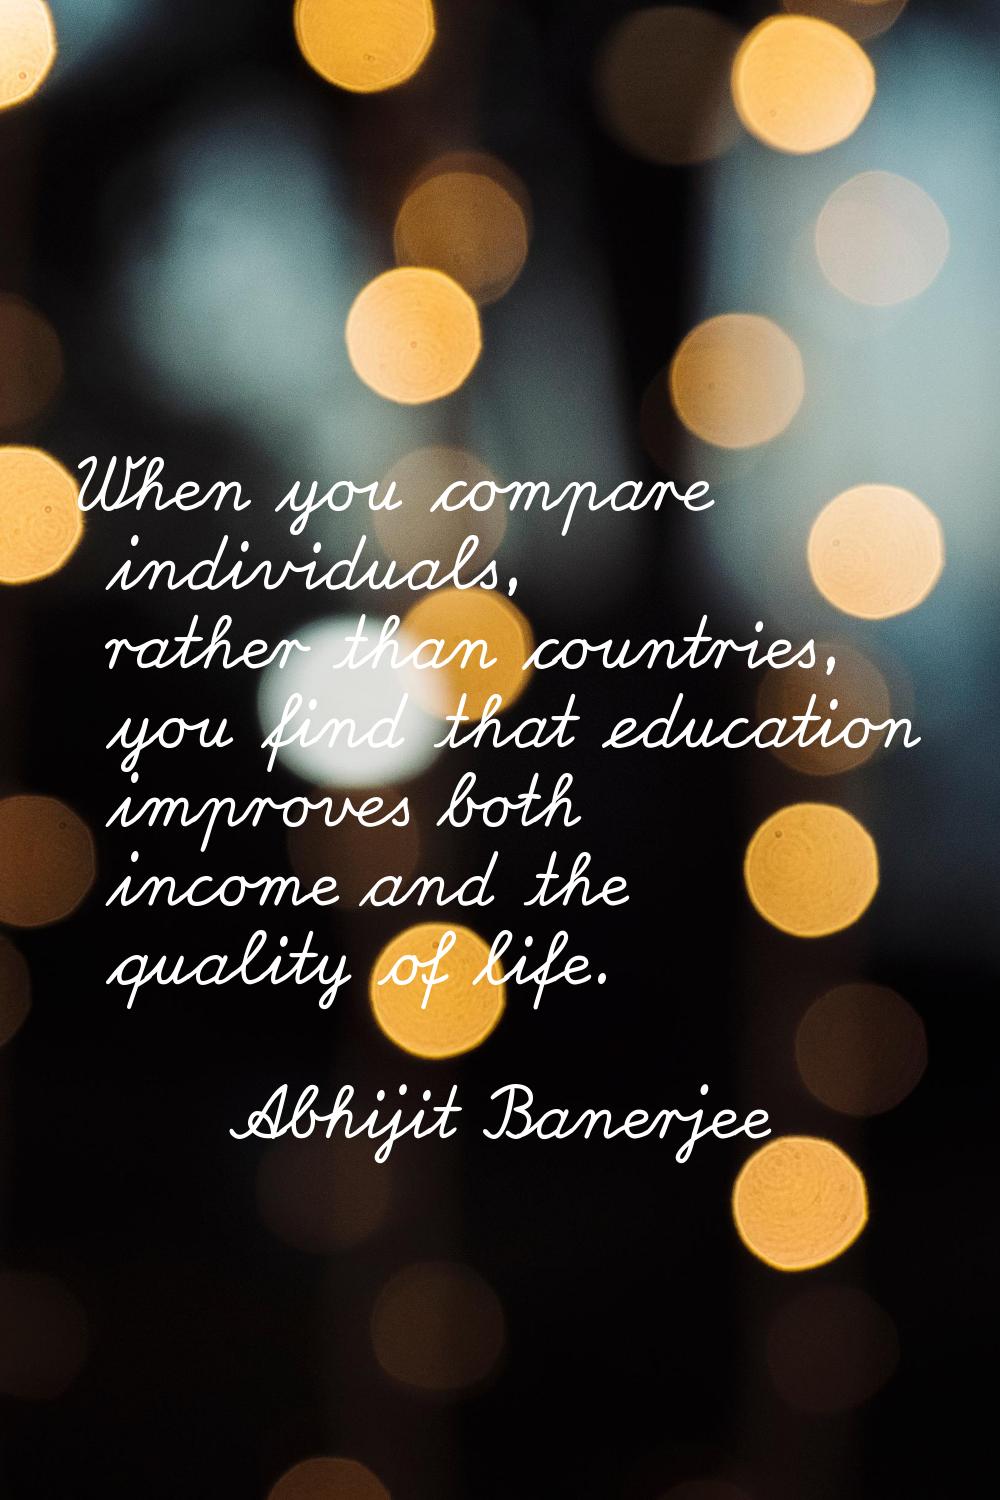 When you compare individuals, rather than countries, you find that education improves both income a